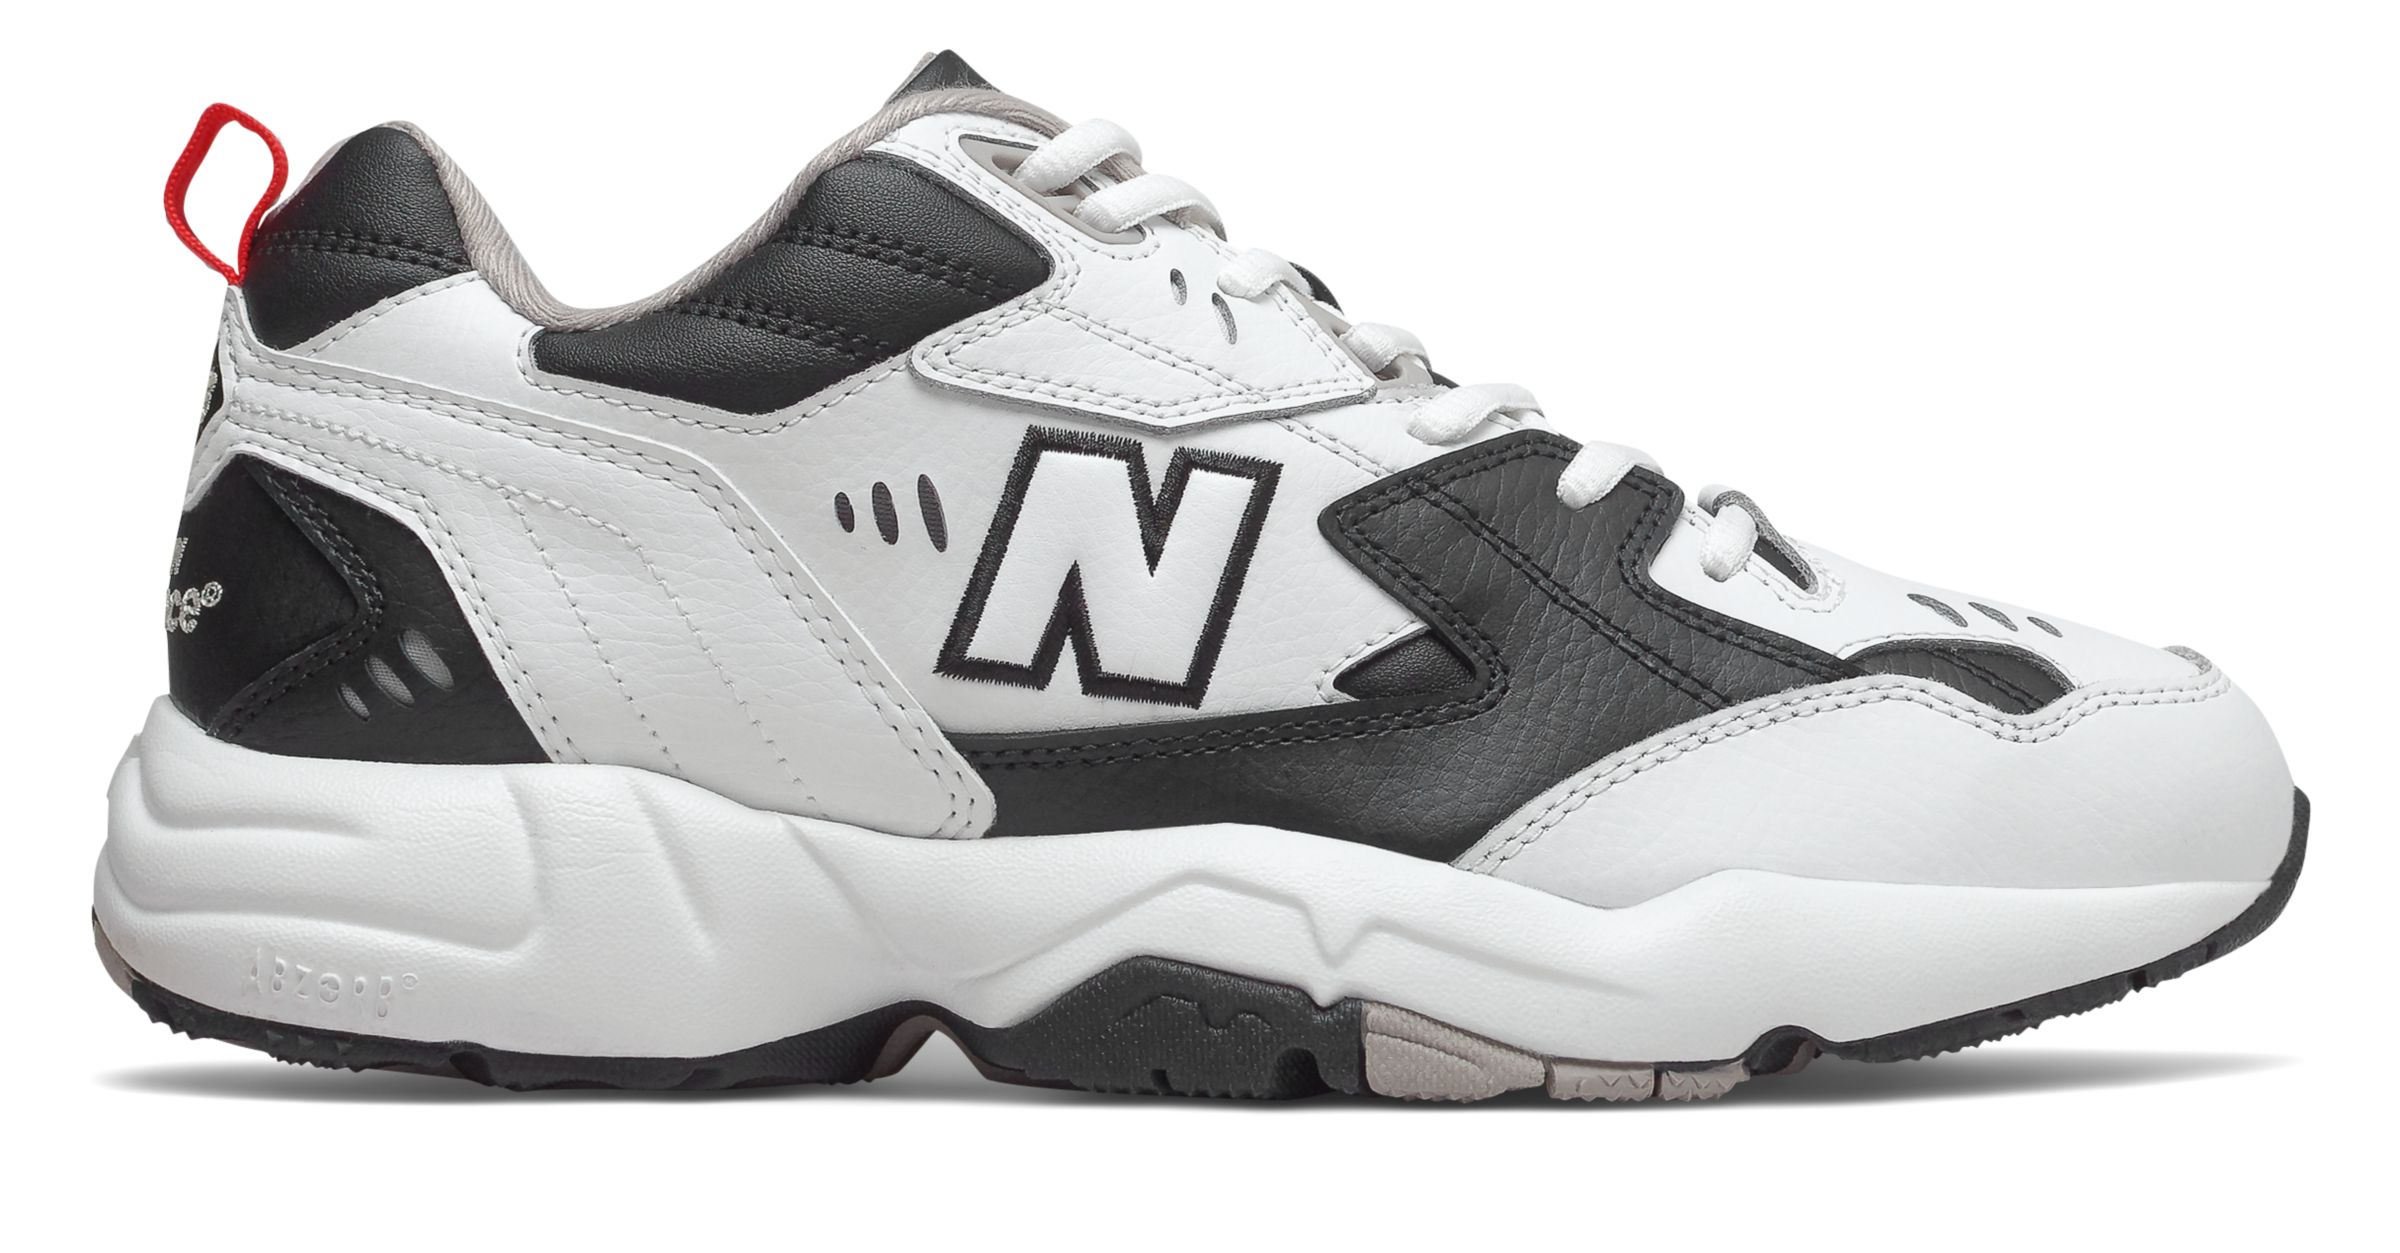 Off on MX608RB1 at Joe's New Balance Outlet